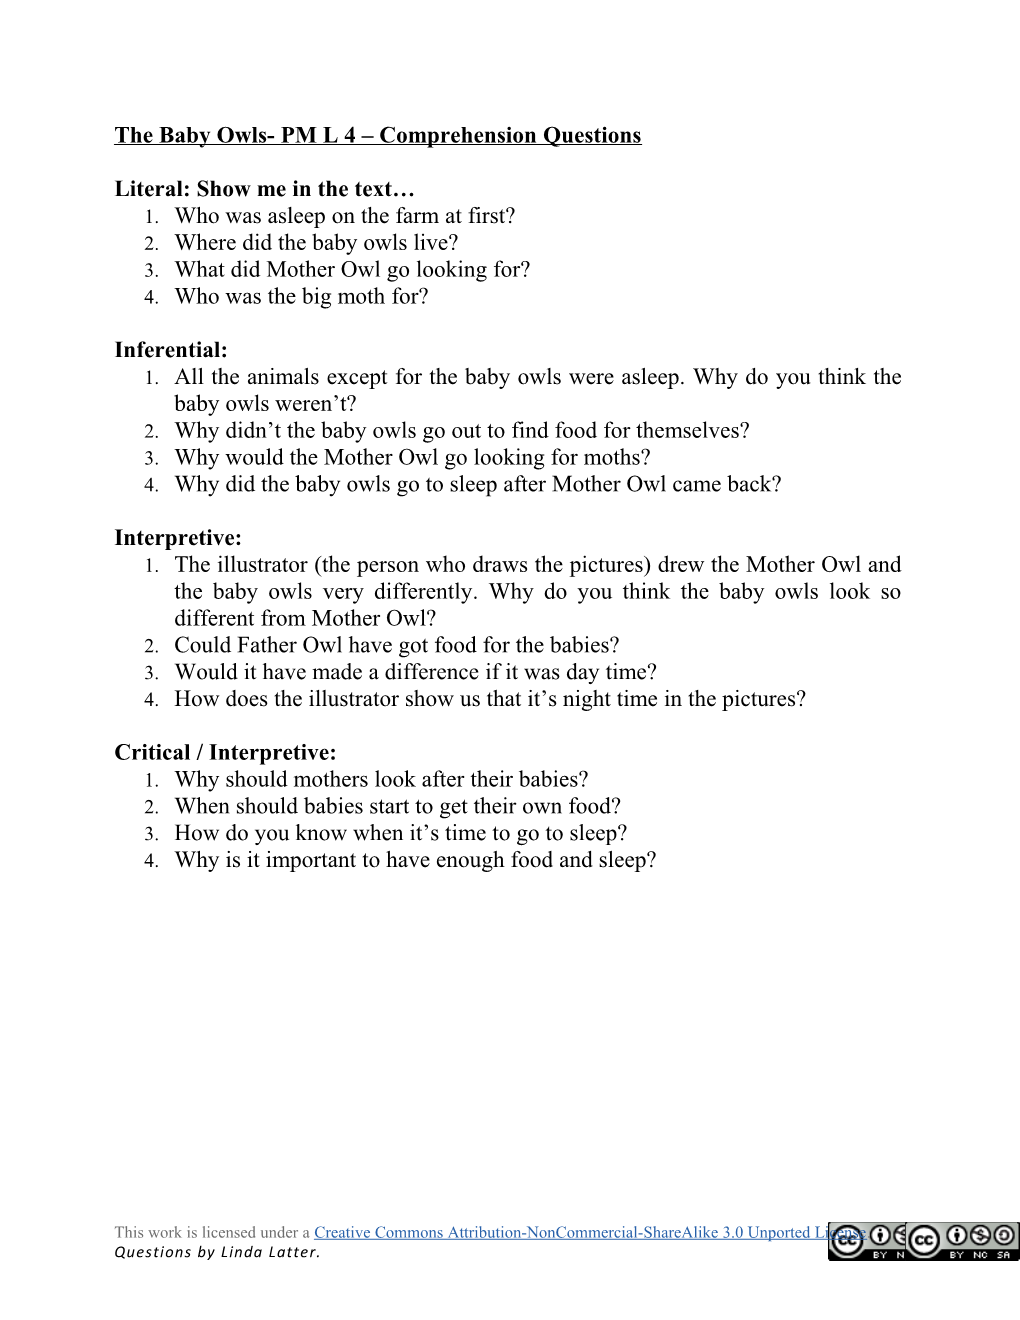 The Baby Owls- PM L 4 Comprehension Questions